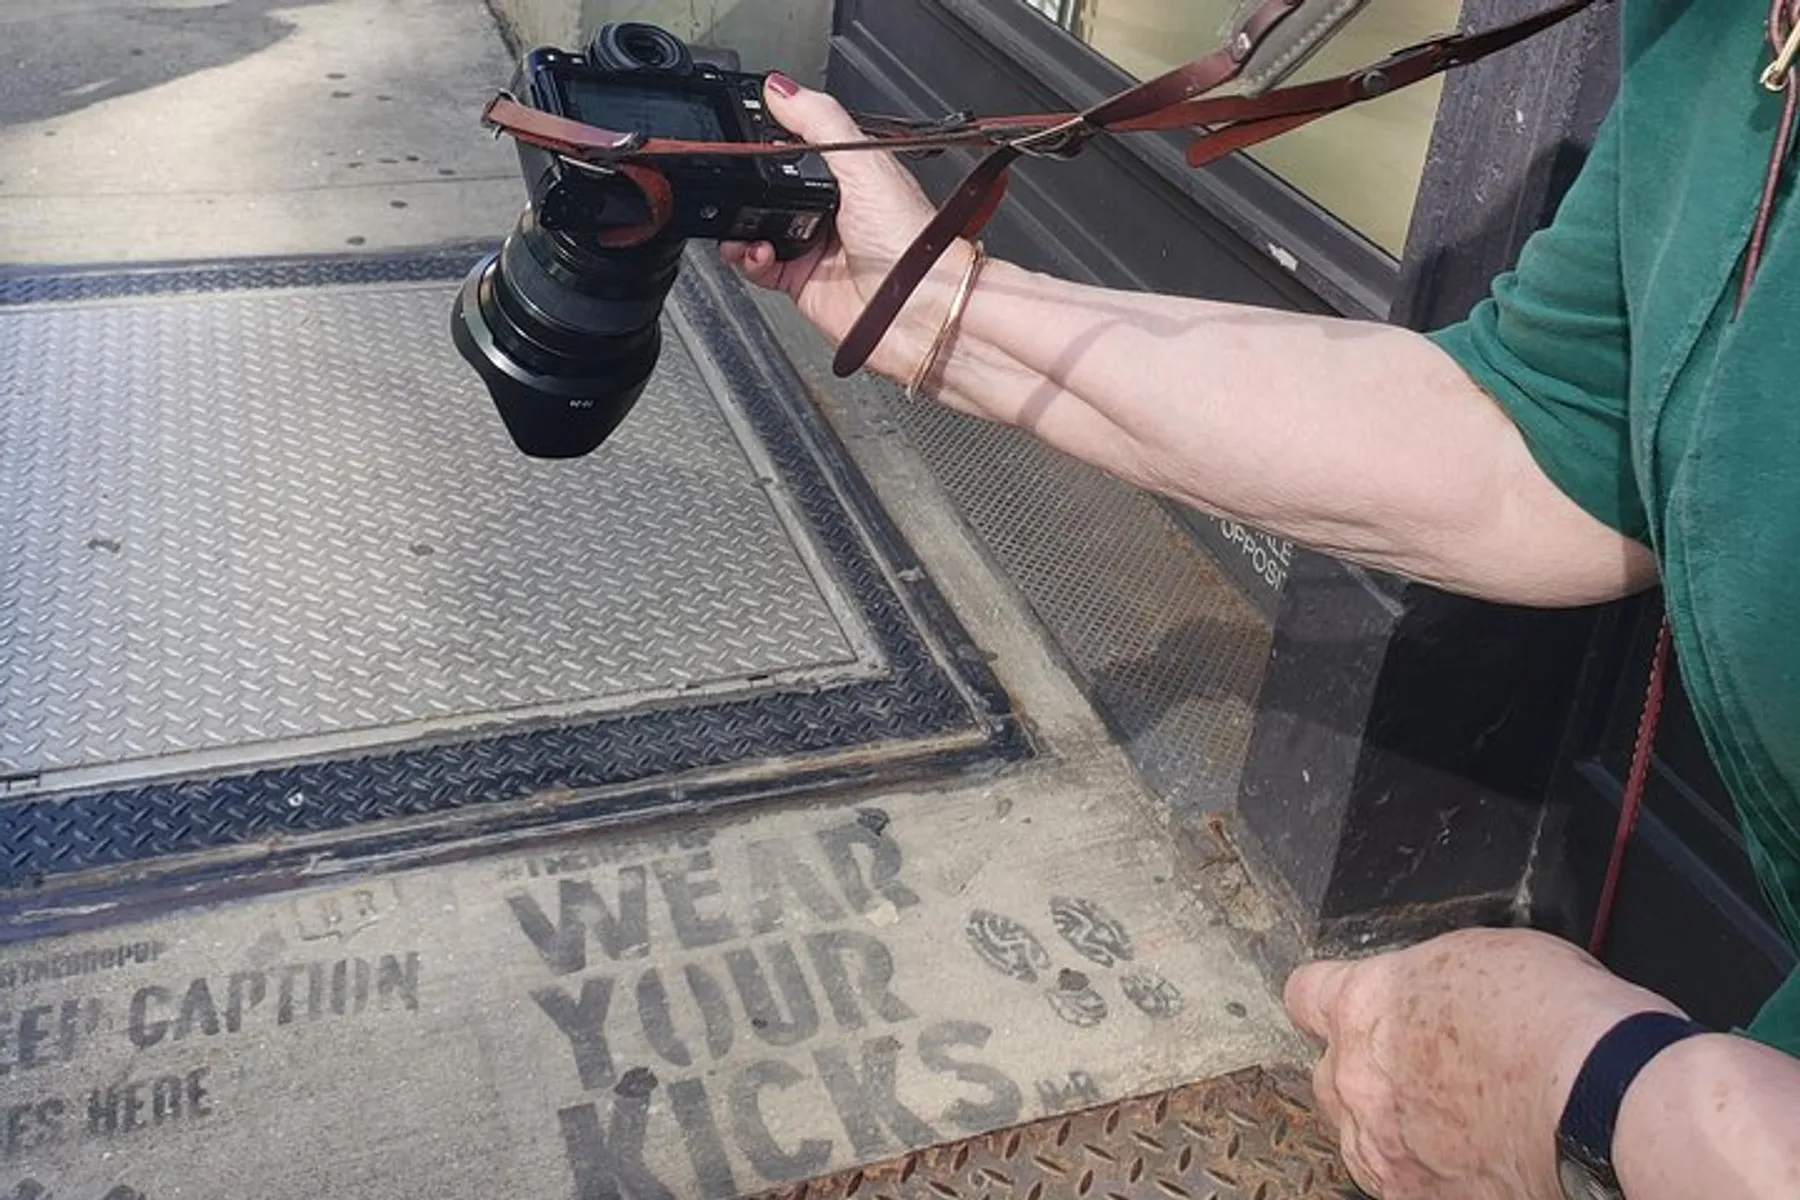 A person is holding a camera next to a dirty doormat with the phrase Wear your kicks stenciled on it.